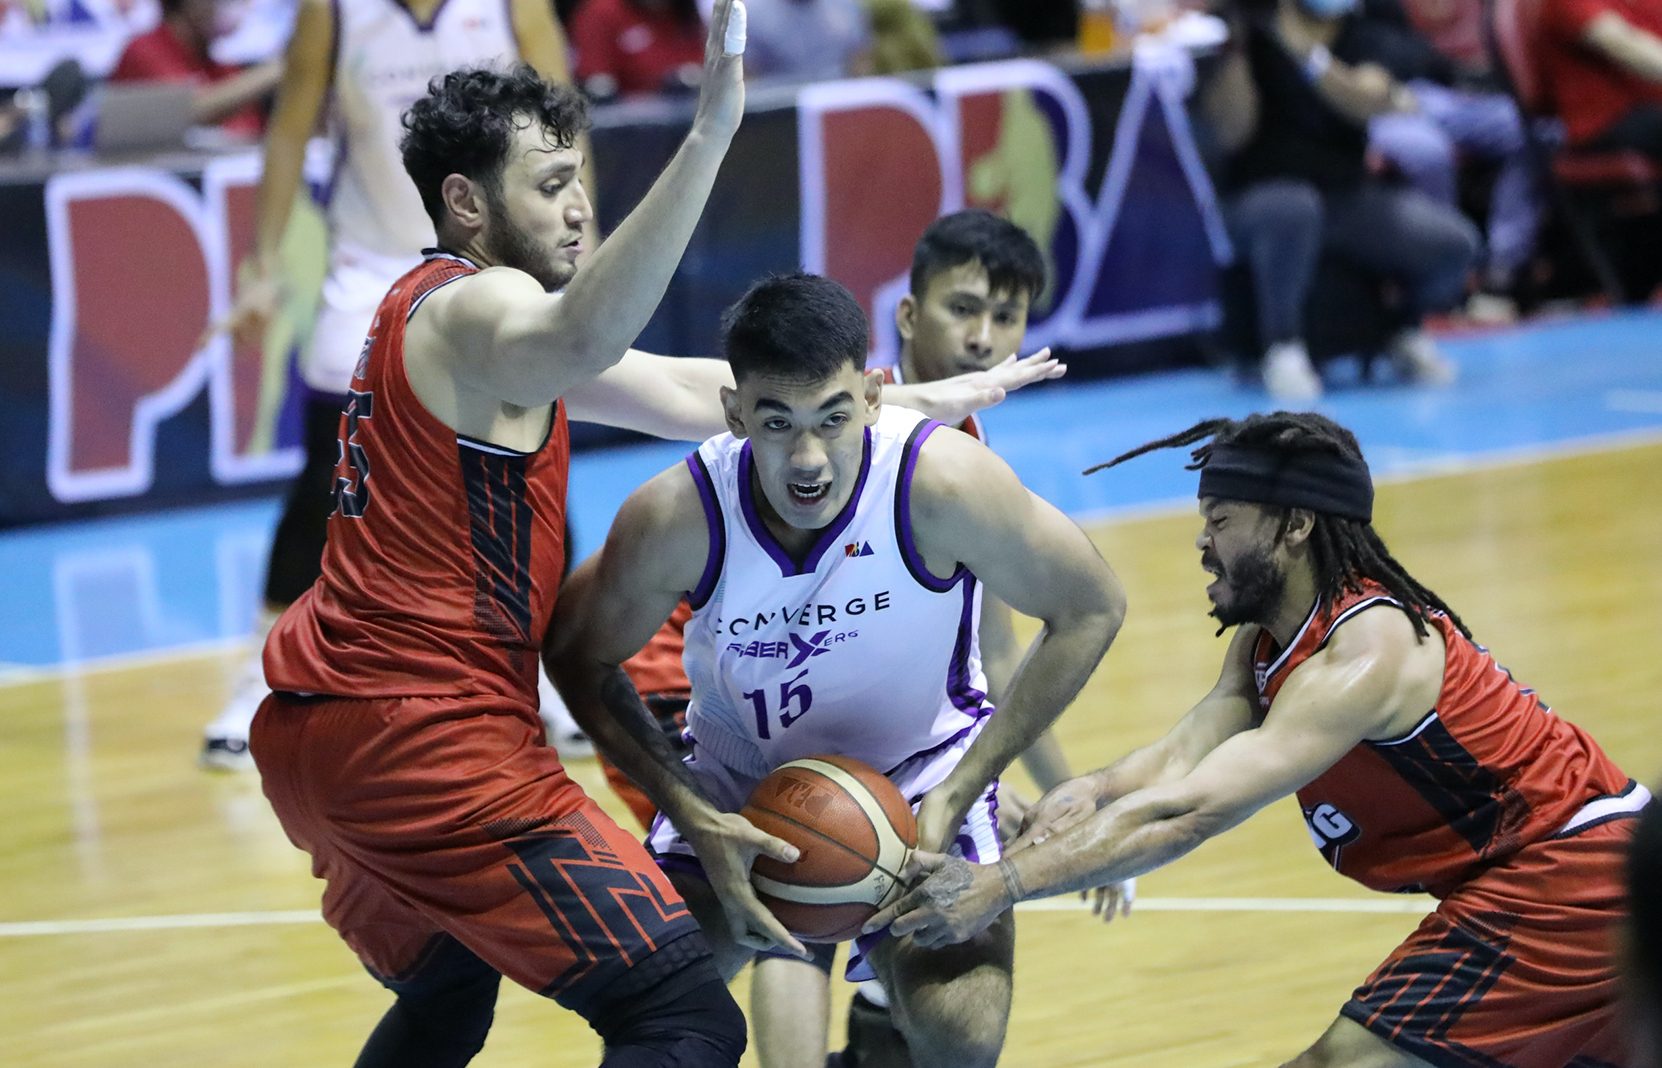 Rookie Arana delivers big plays as Converge stretches Blackwater skid